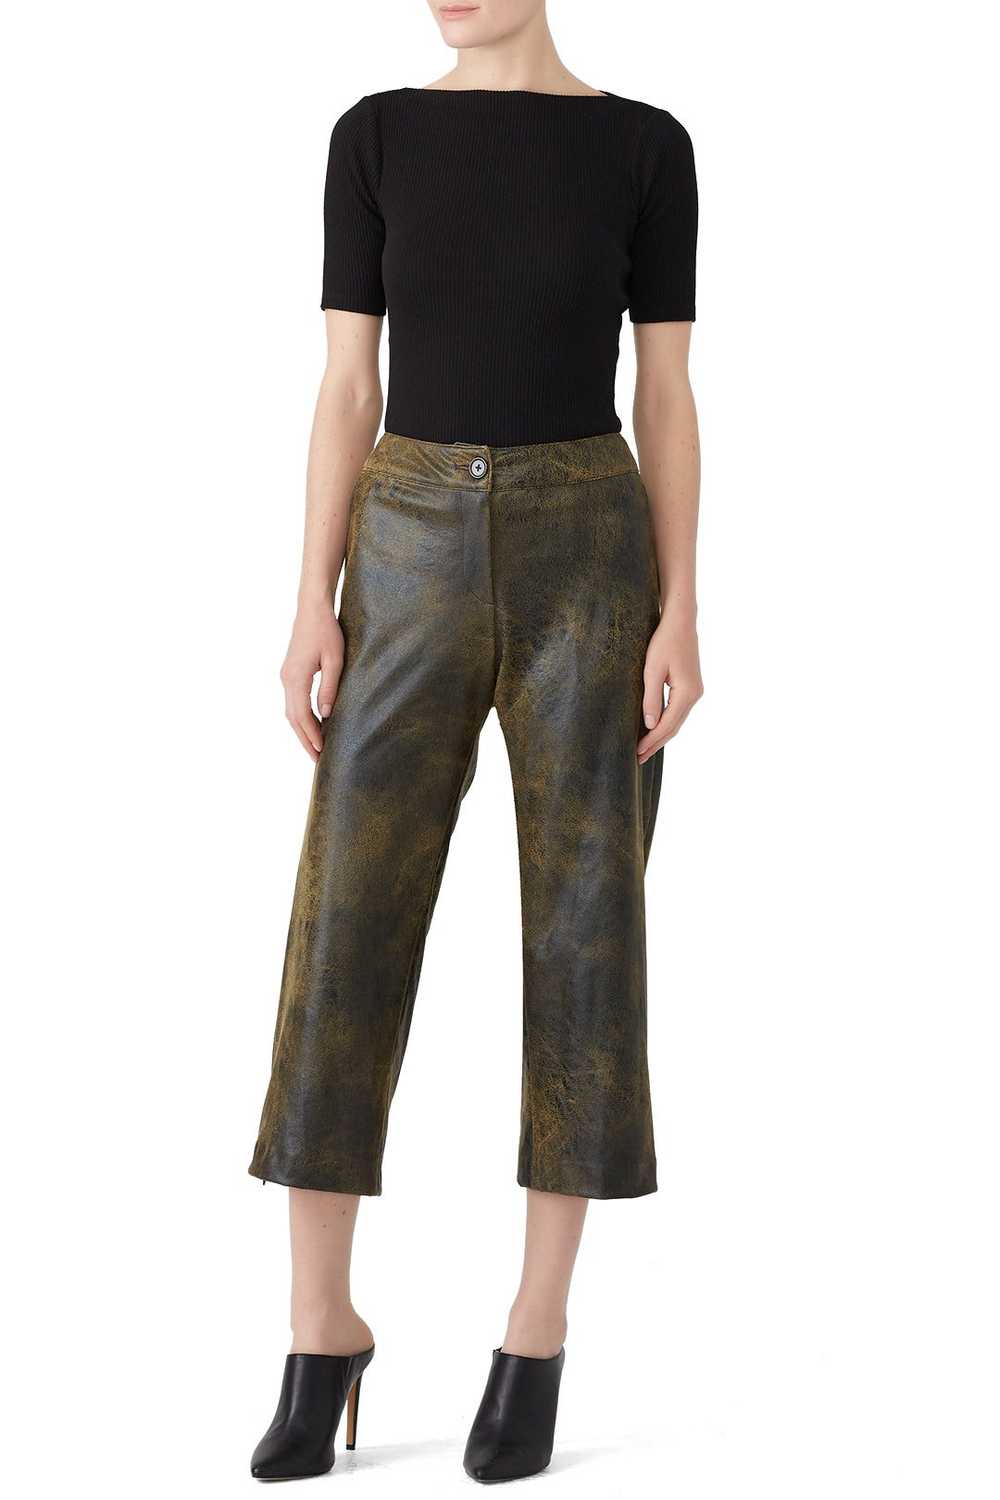 Snider Franz Faux Leather Gaucho Pants - image 1